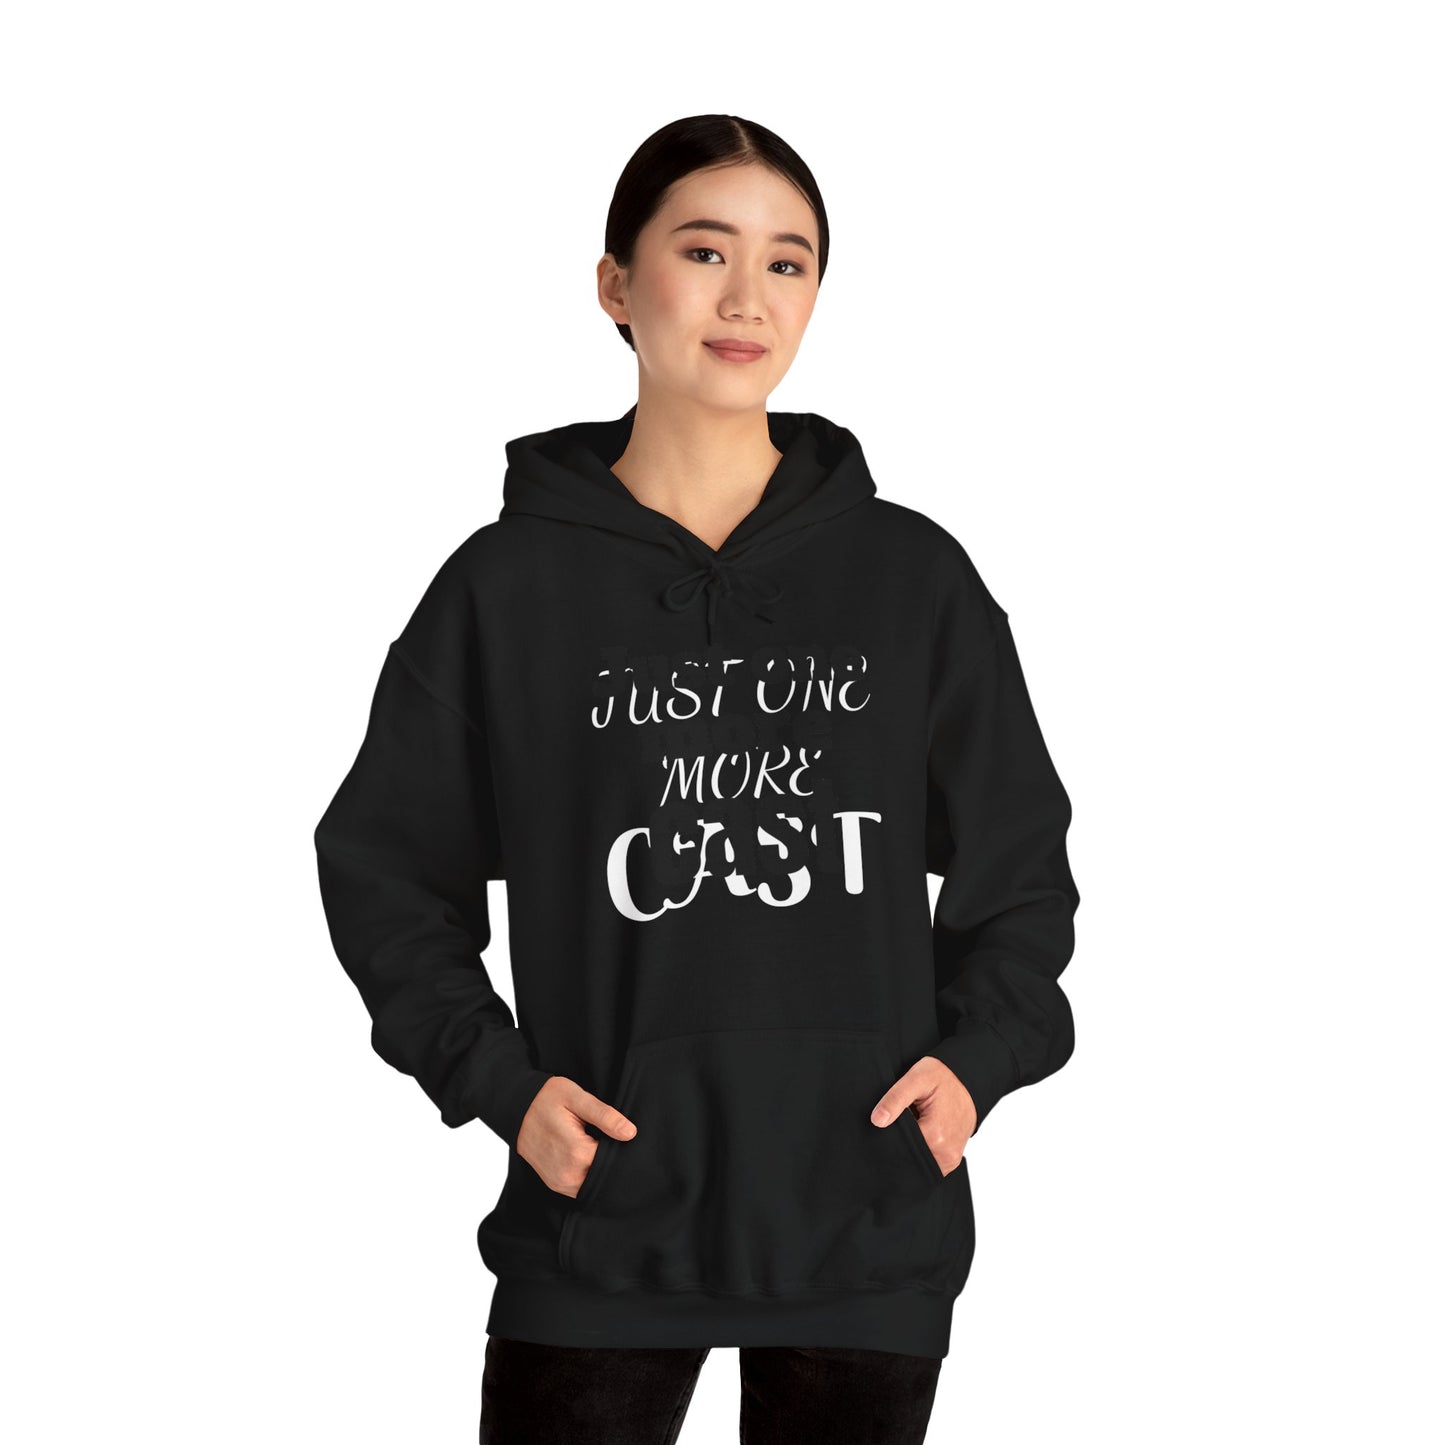 This heavy hooded sweatshirt is great gifts for him. Men's hooded pullover. Can be personalized. Heavy Blend™ Hooded Sweatshirt